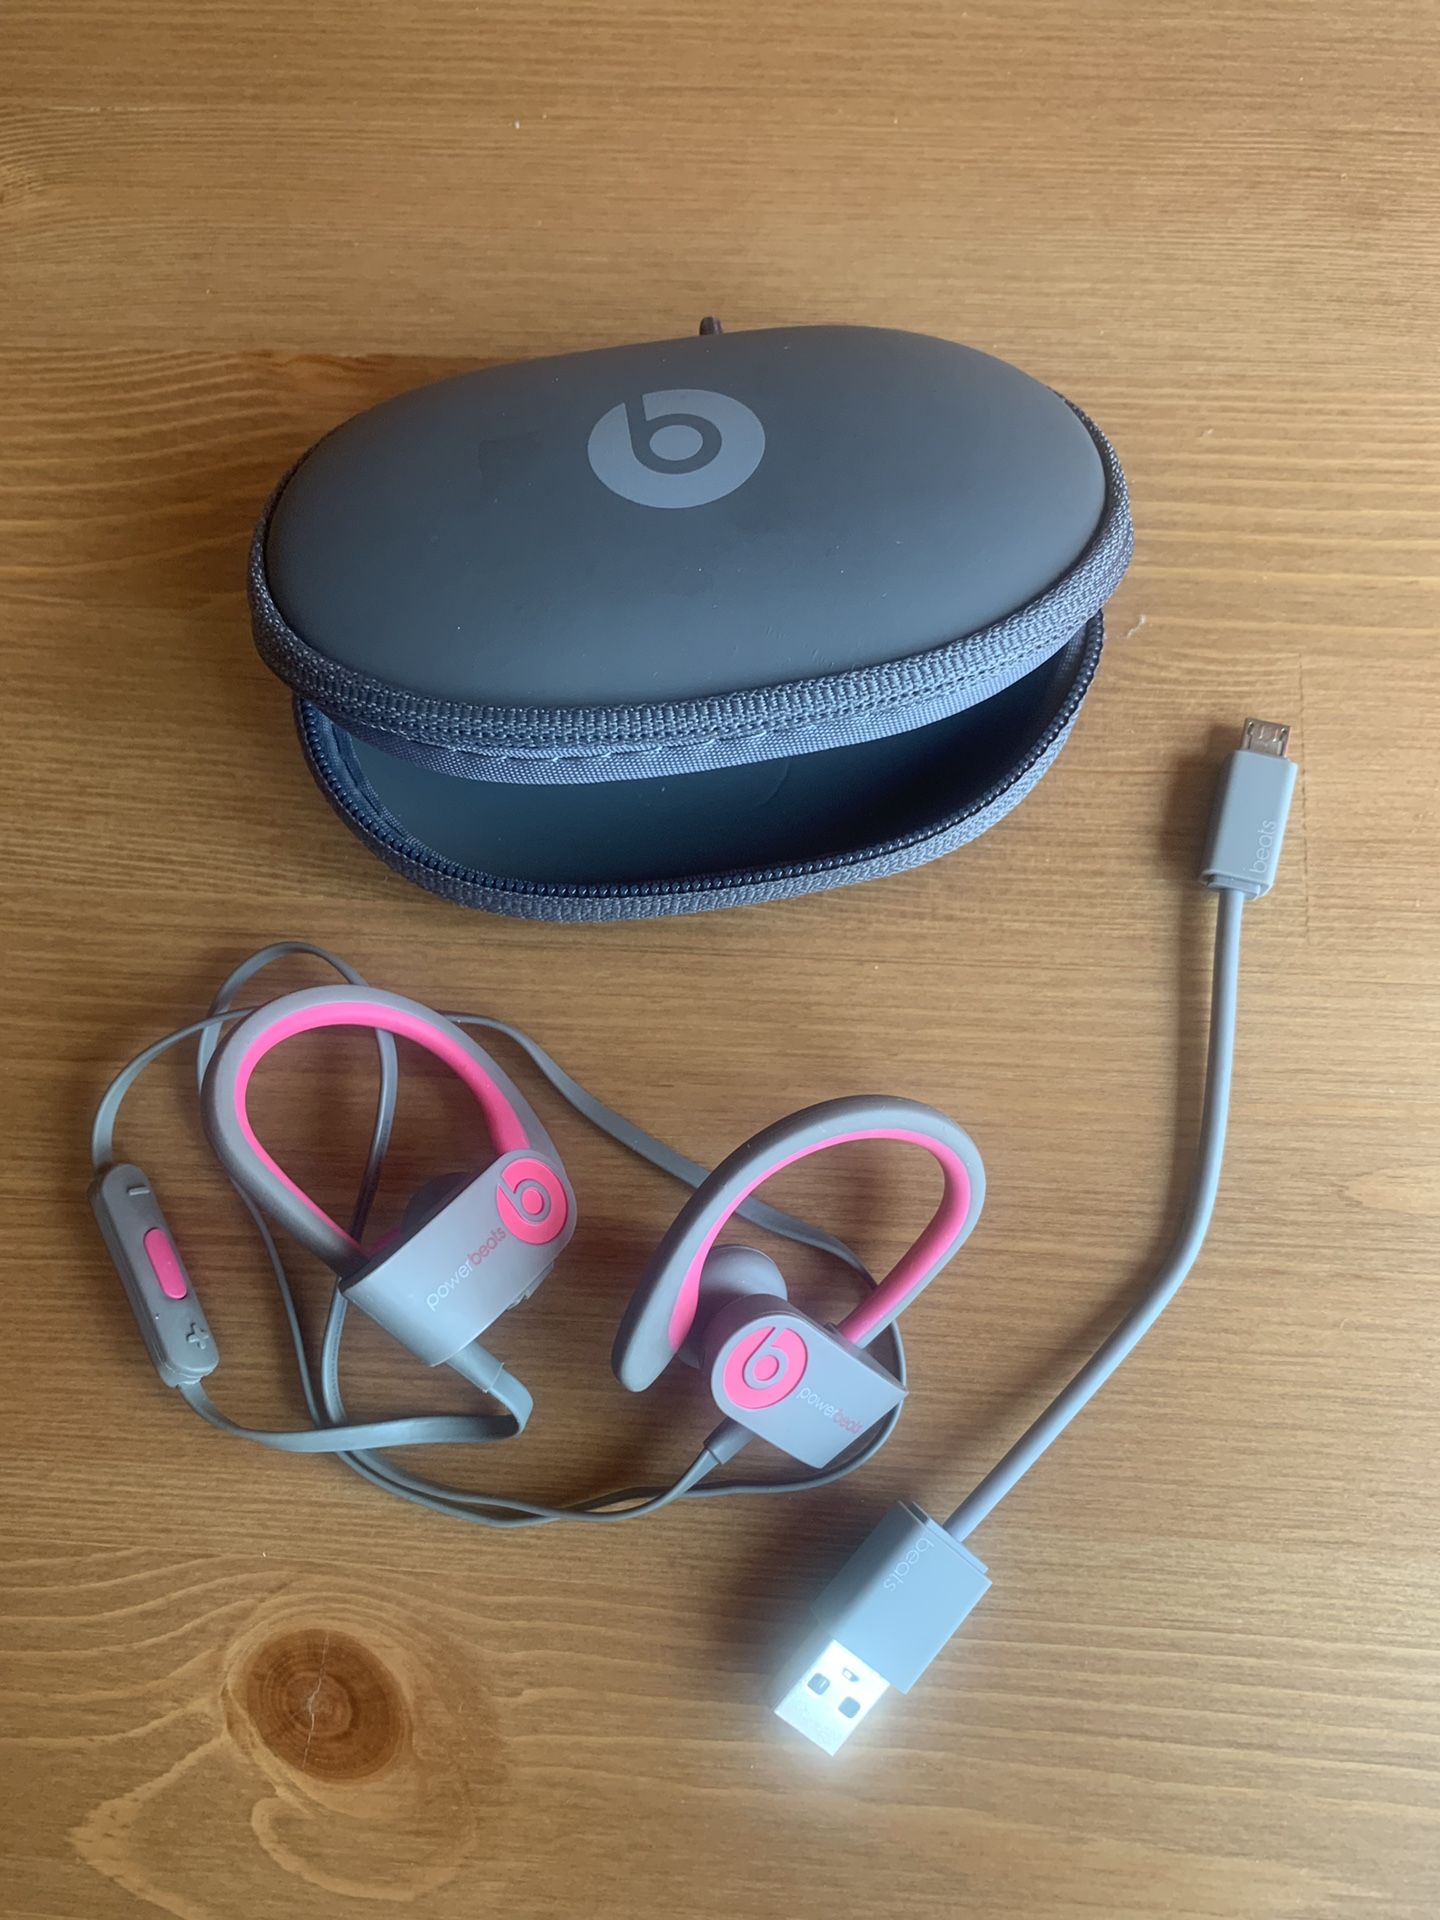 Beats wireless headphones - pink and gray - excellent condition